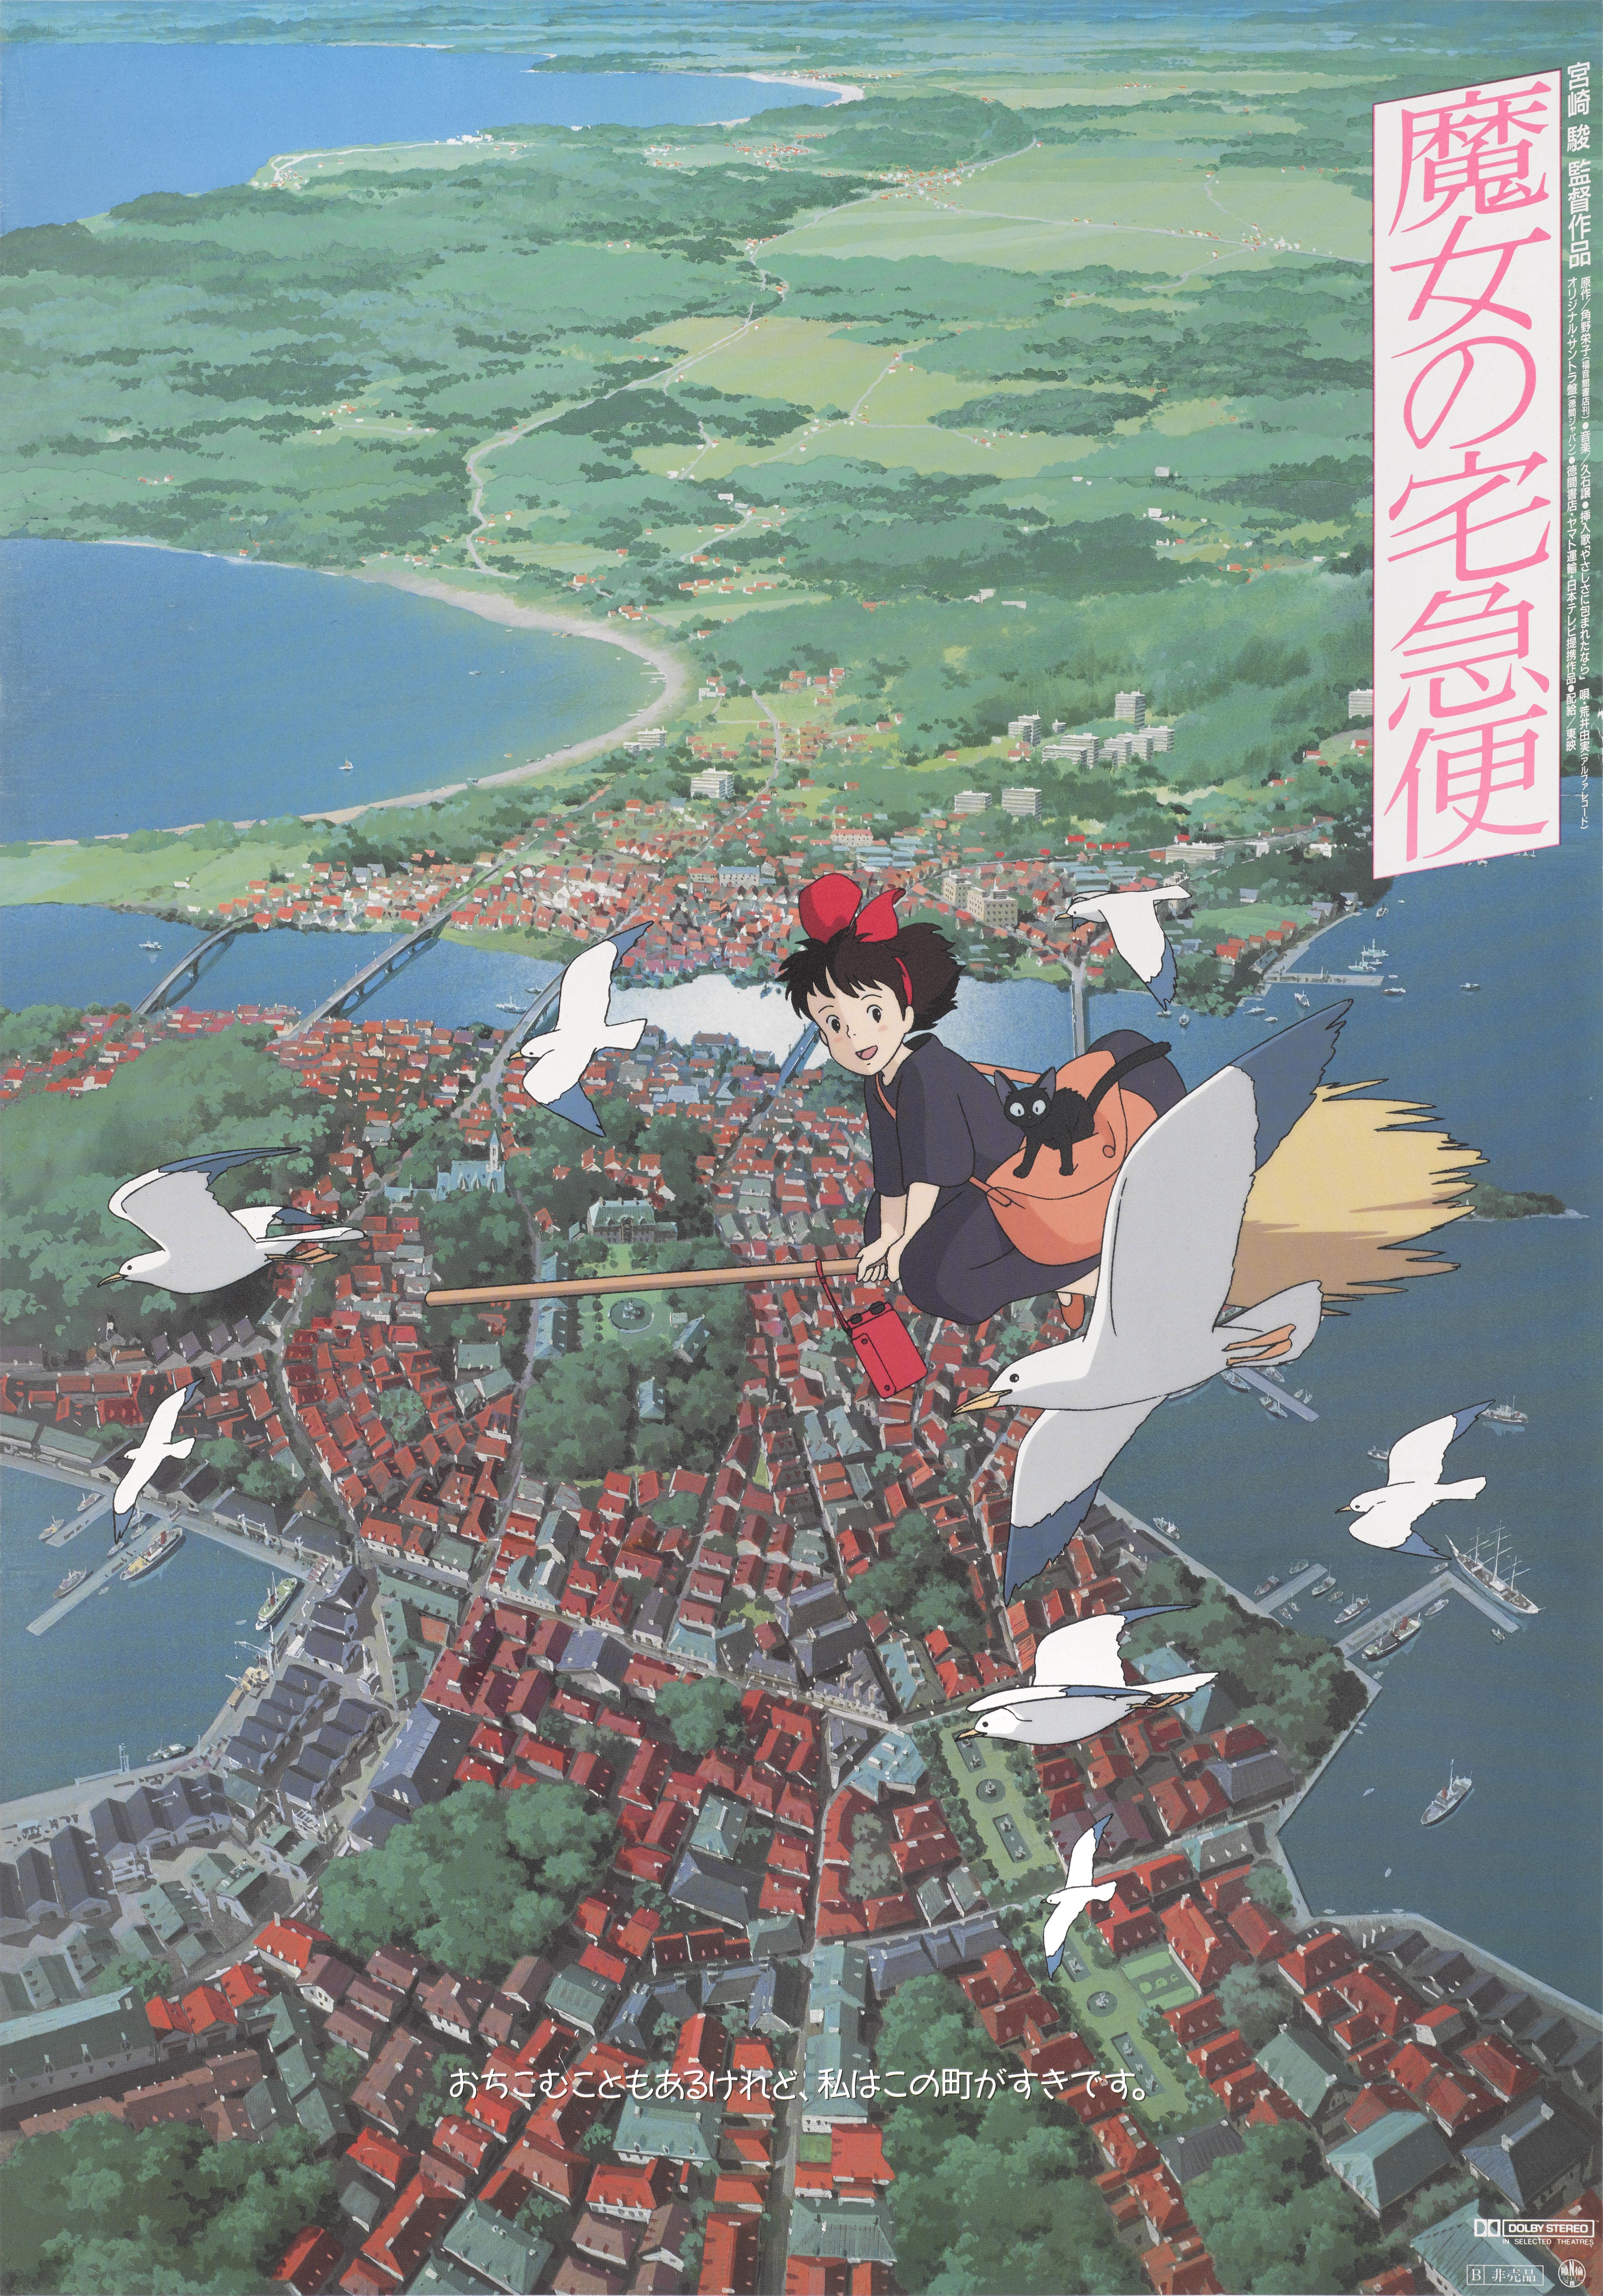 Original style B Vintage film poster for Hayao Miyazaki 1989 Japanese Studio Ghibli animation.
This is the advance poster used to advertise the film before the main poster was released.
This poster is unfolded and linen backed and would be shipped